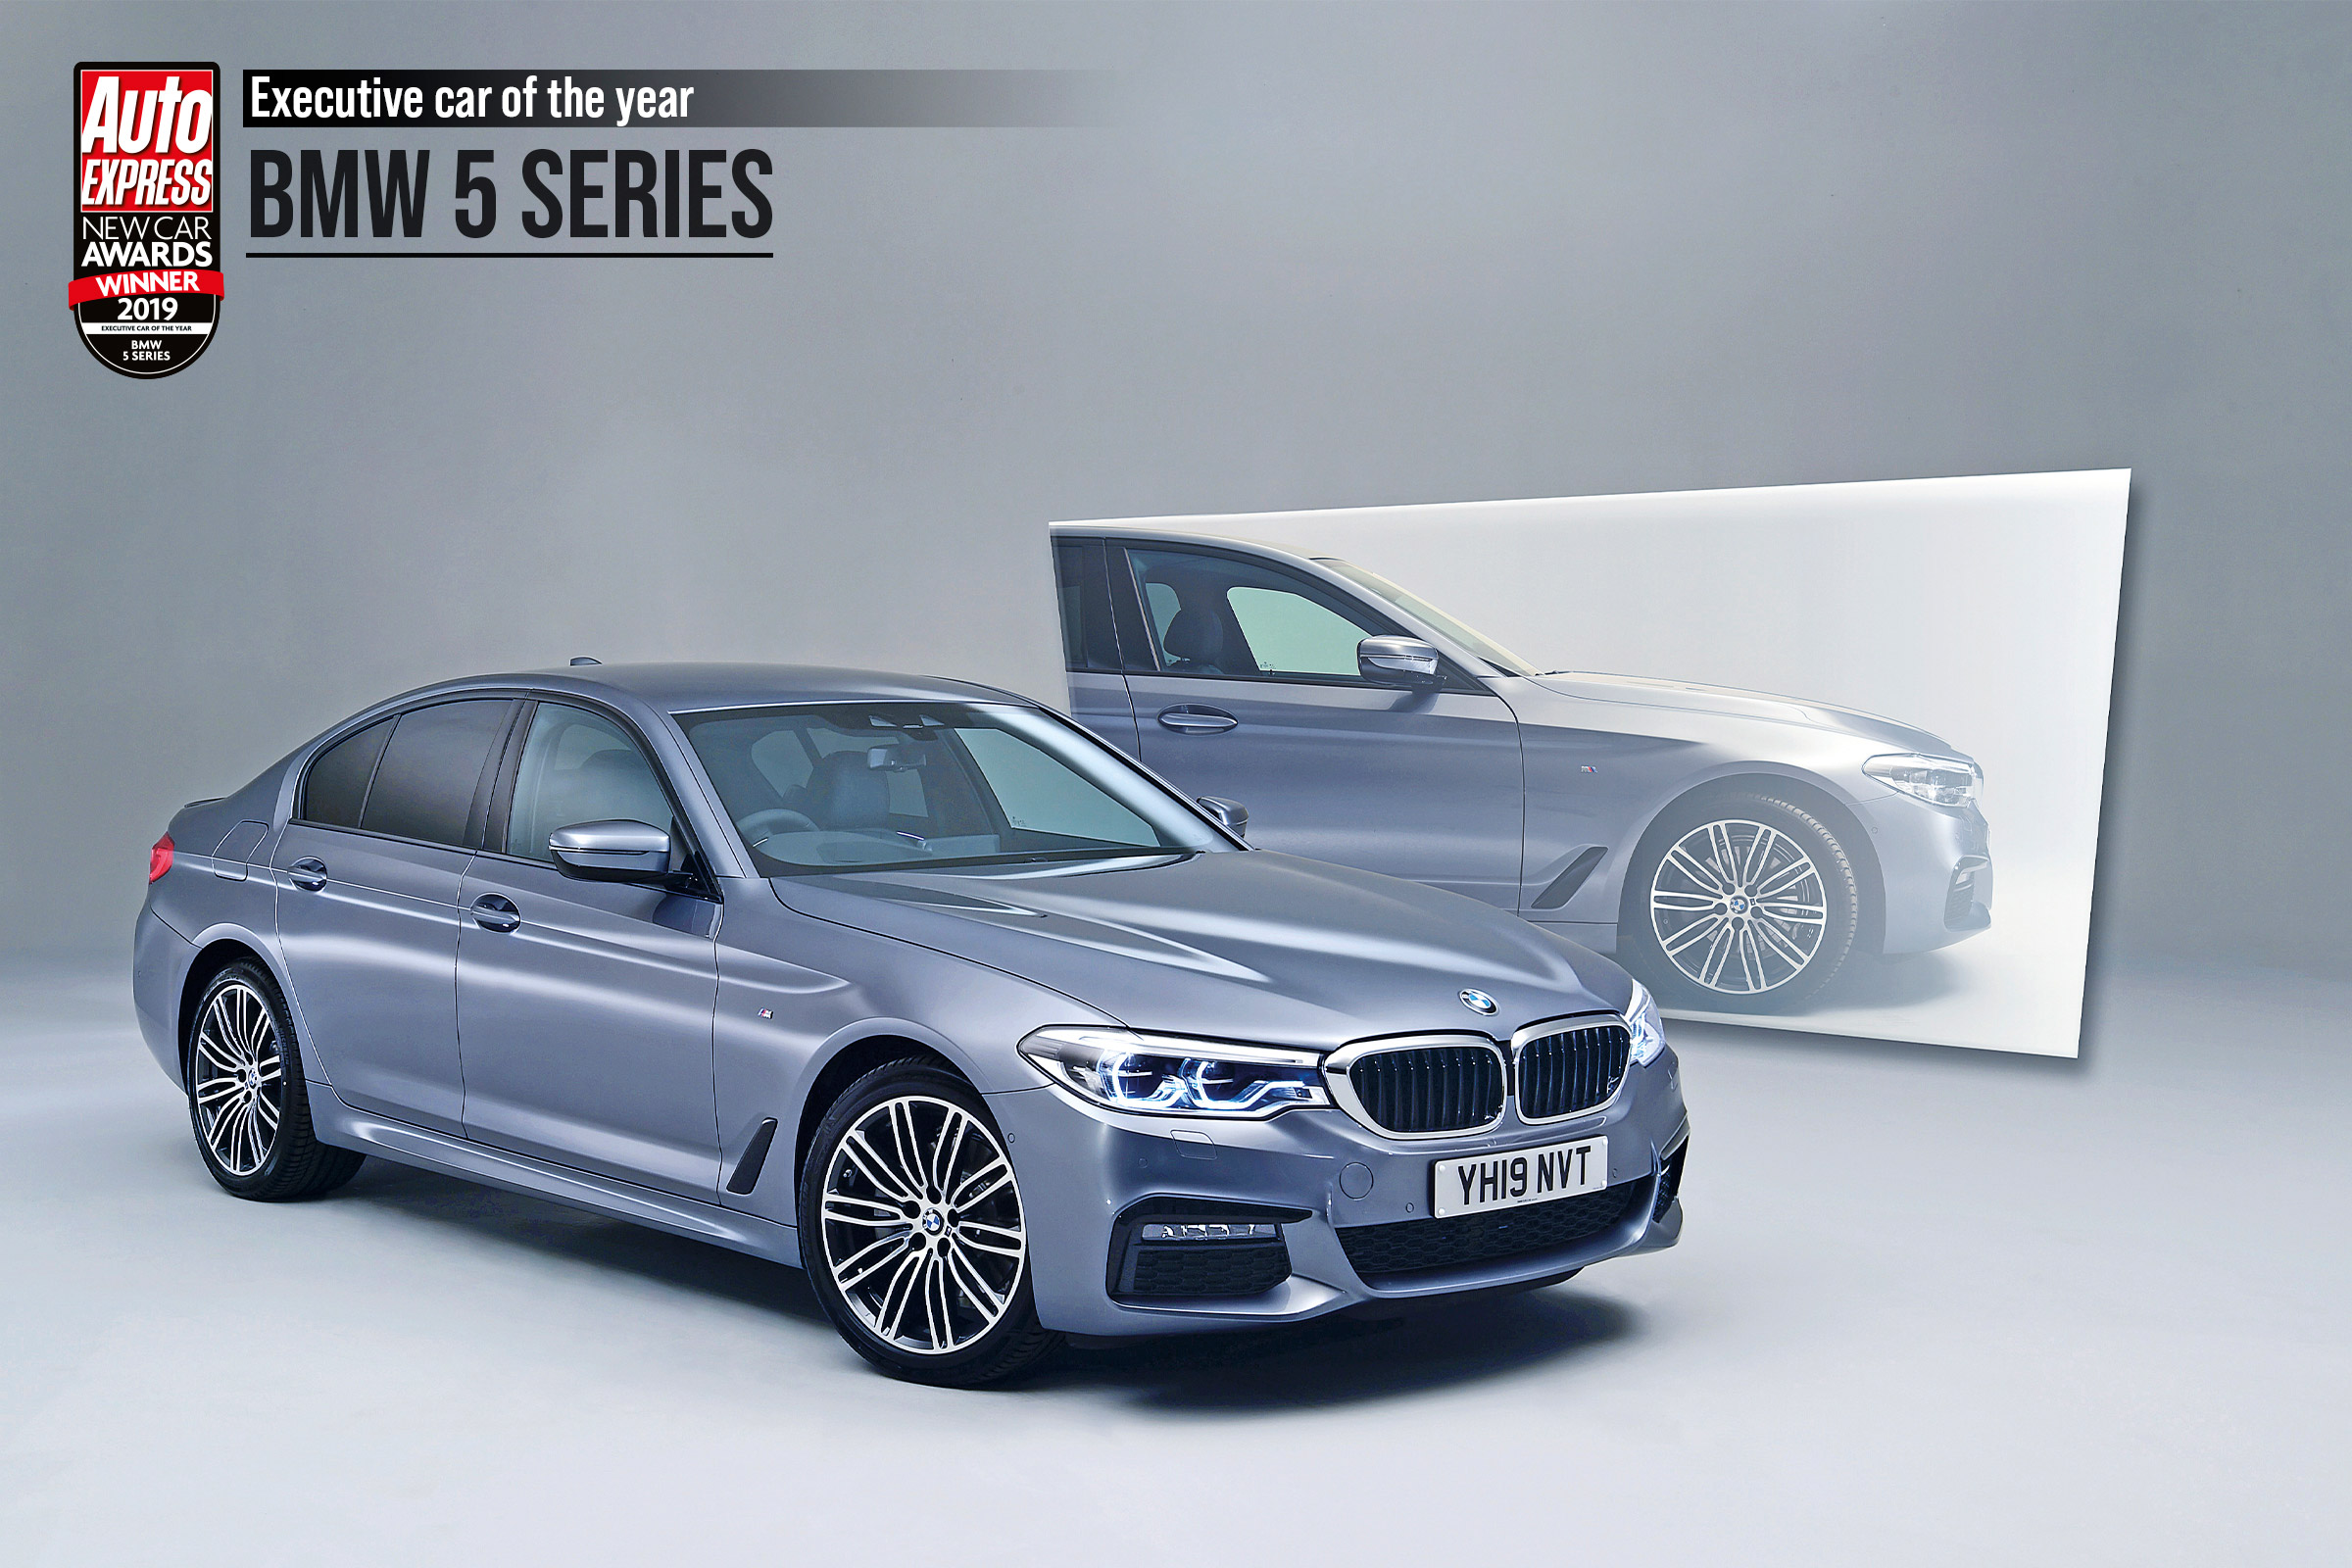 Executive Car of the Year 2019 BMW 5 Series Auto Express